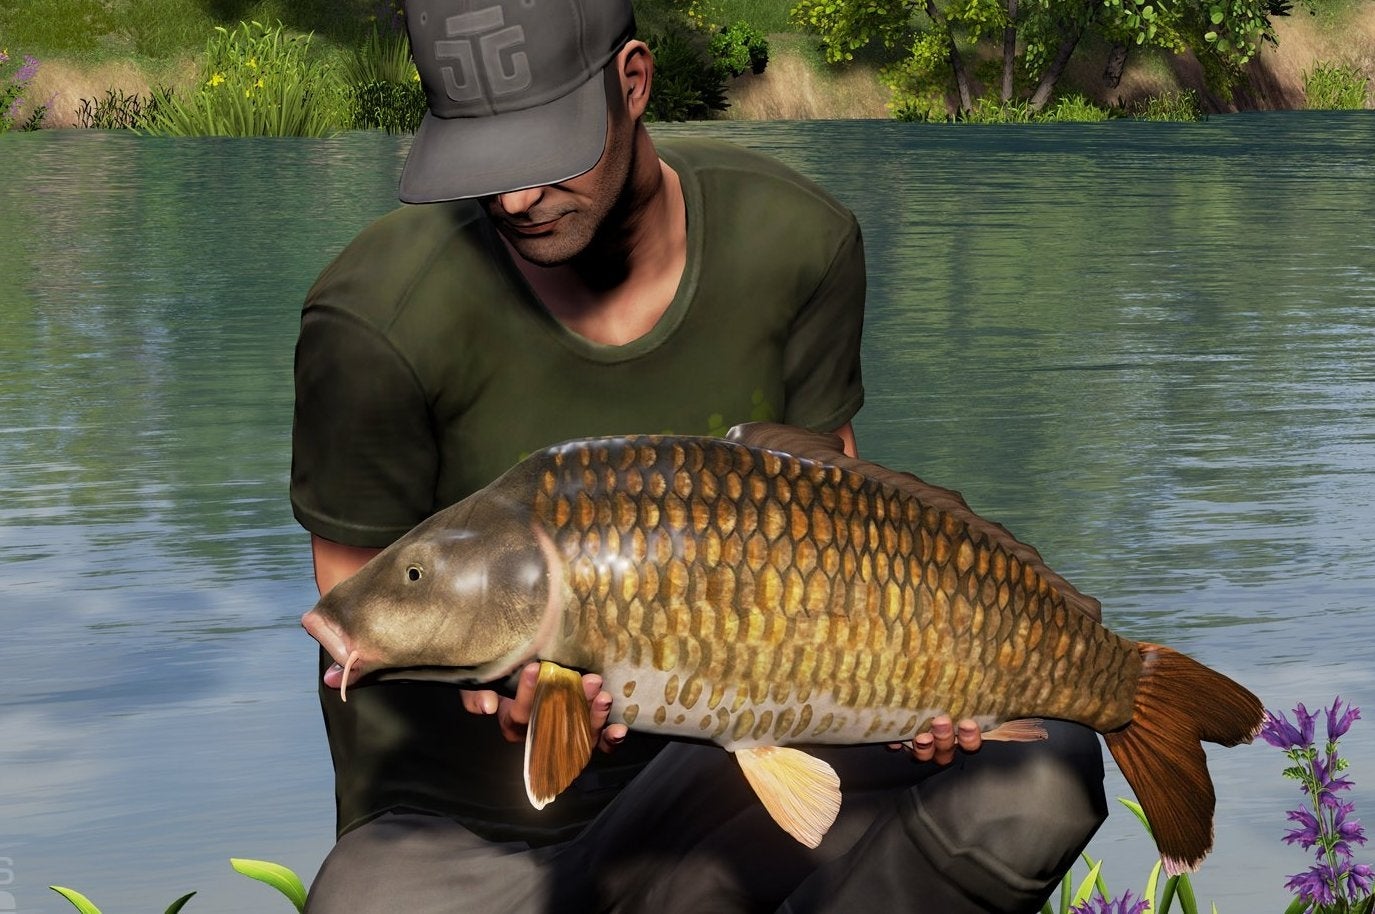 Image for Train Simulator dev releases fishing sim on Steam Early Access